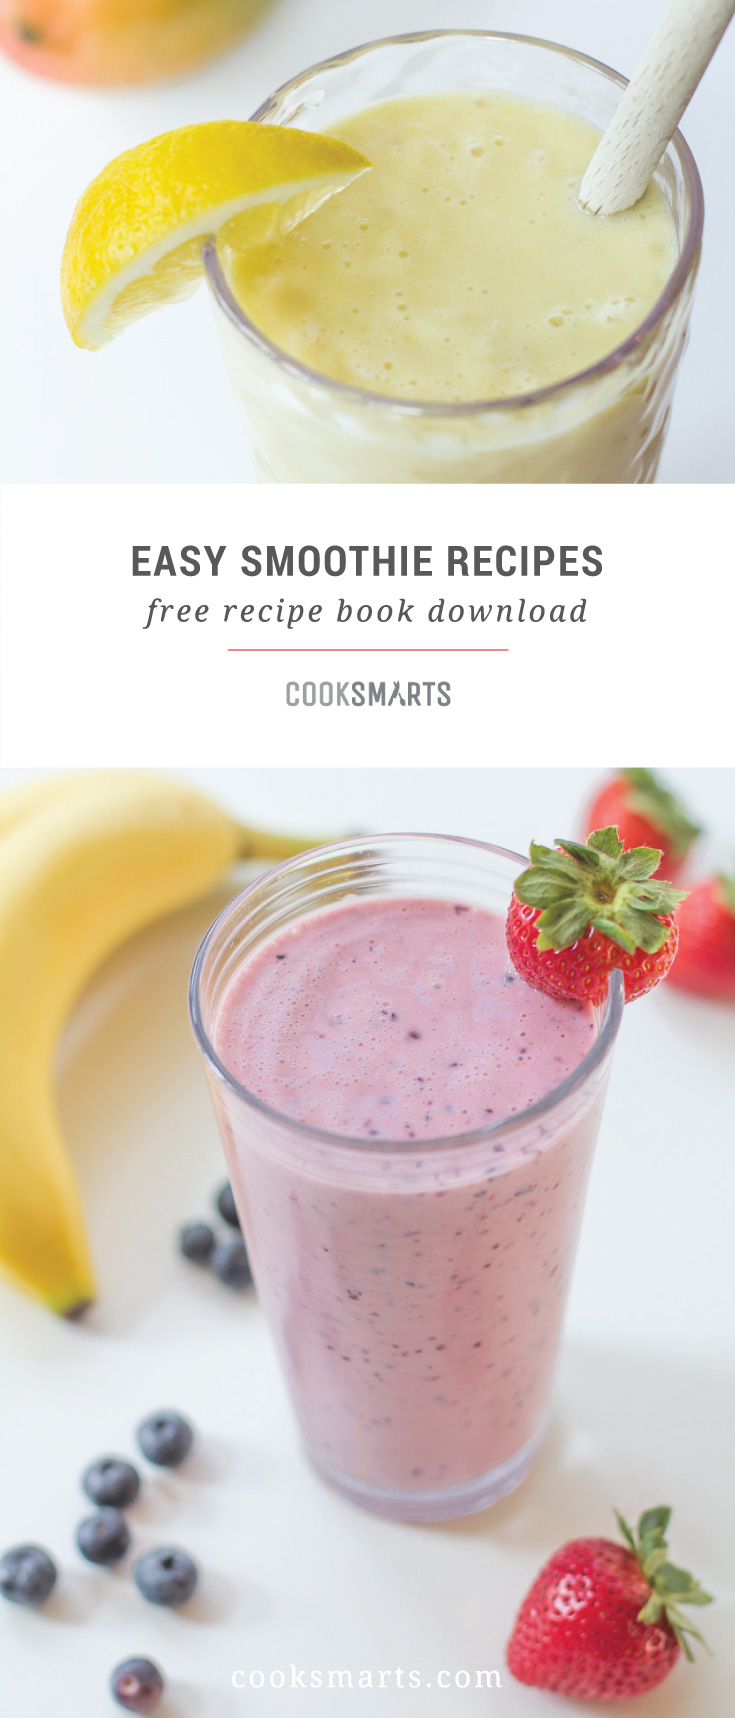 How to Make the Best Smoothies | Cook Smarts